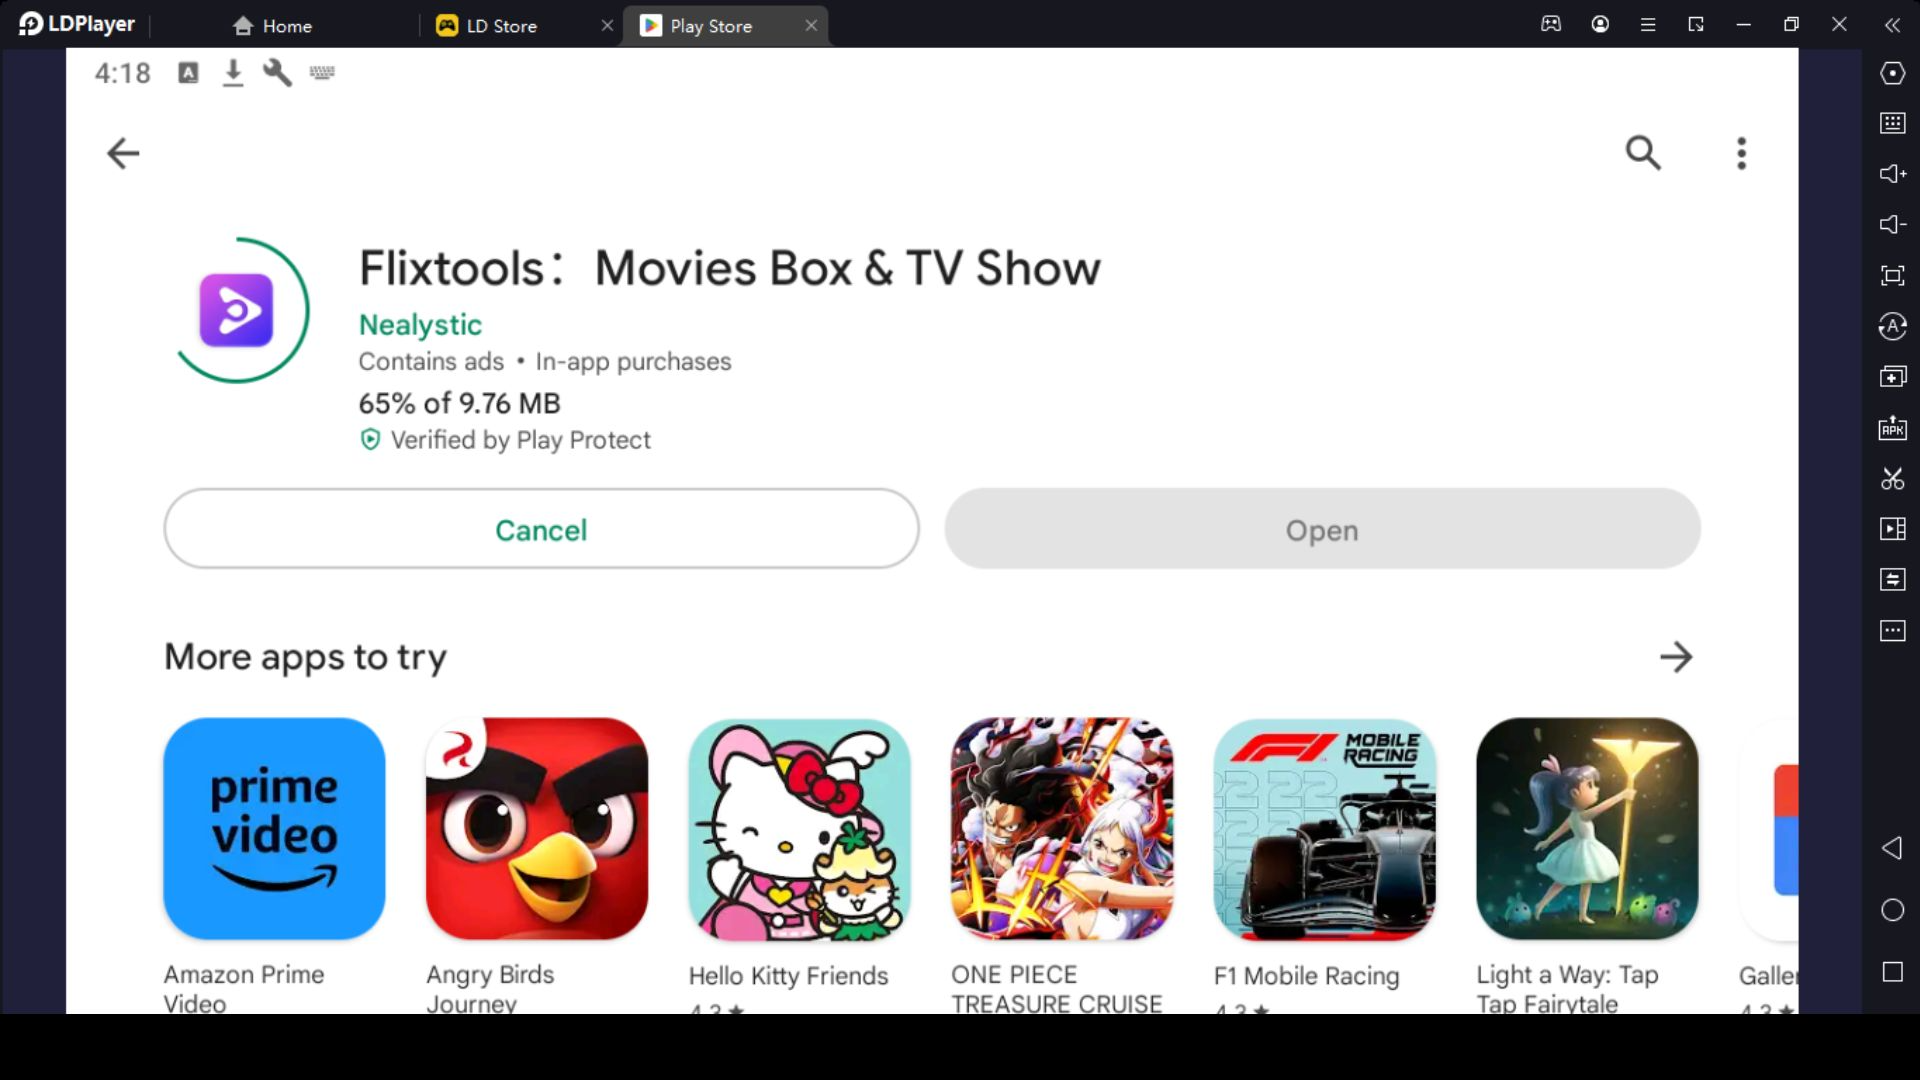 Flixtools: Movies Box & TV Doesn't Install Properly to My Device